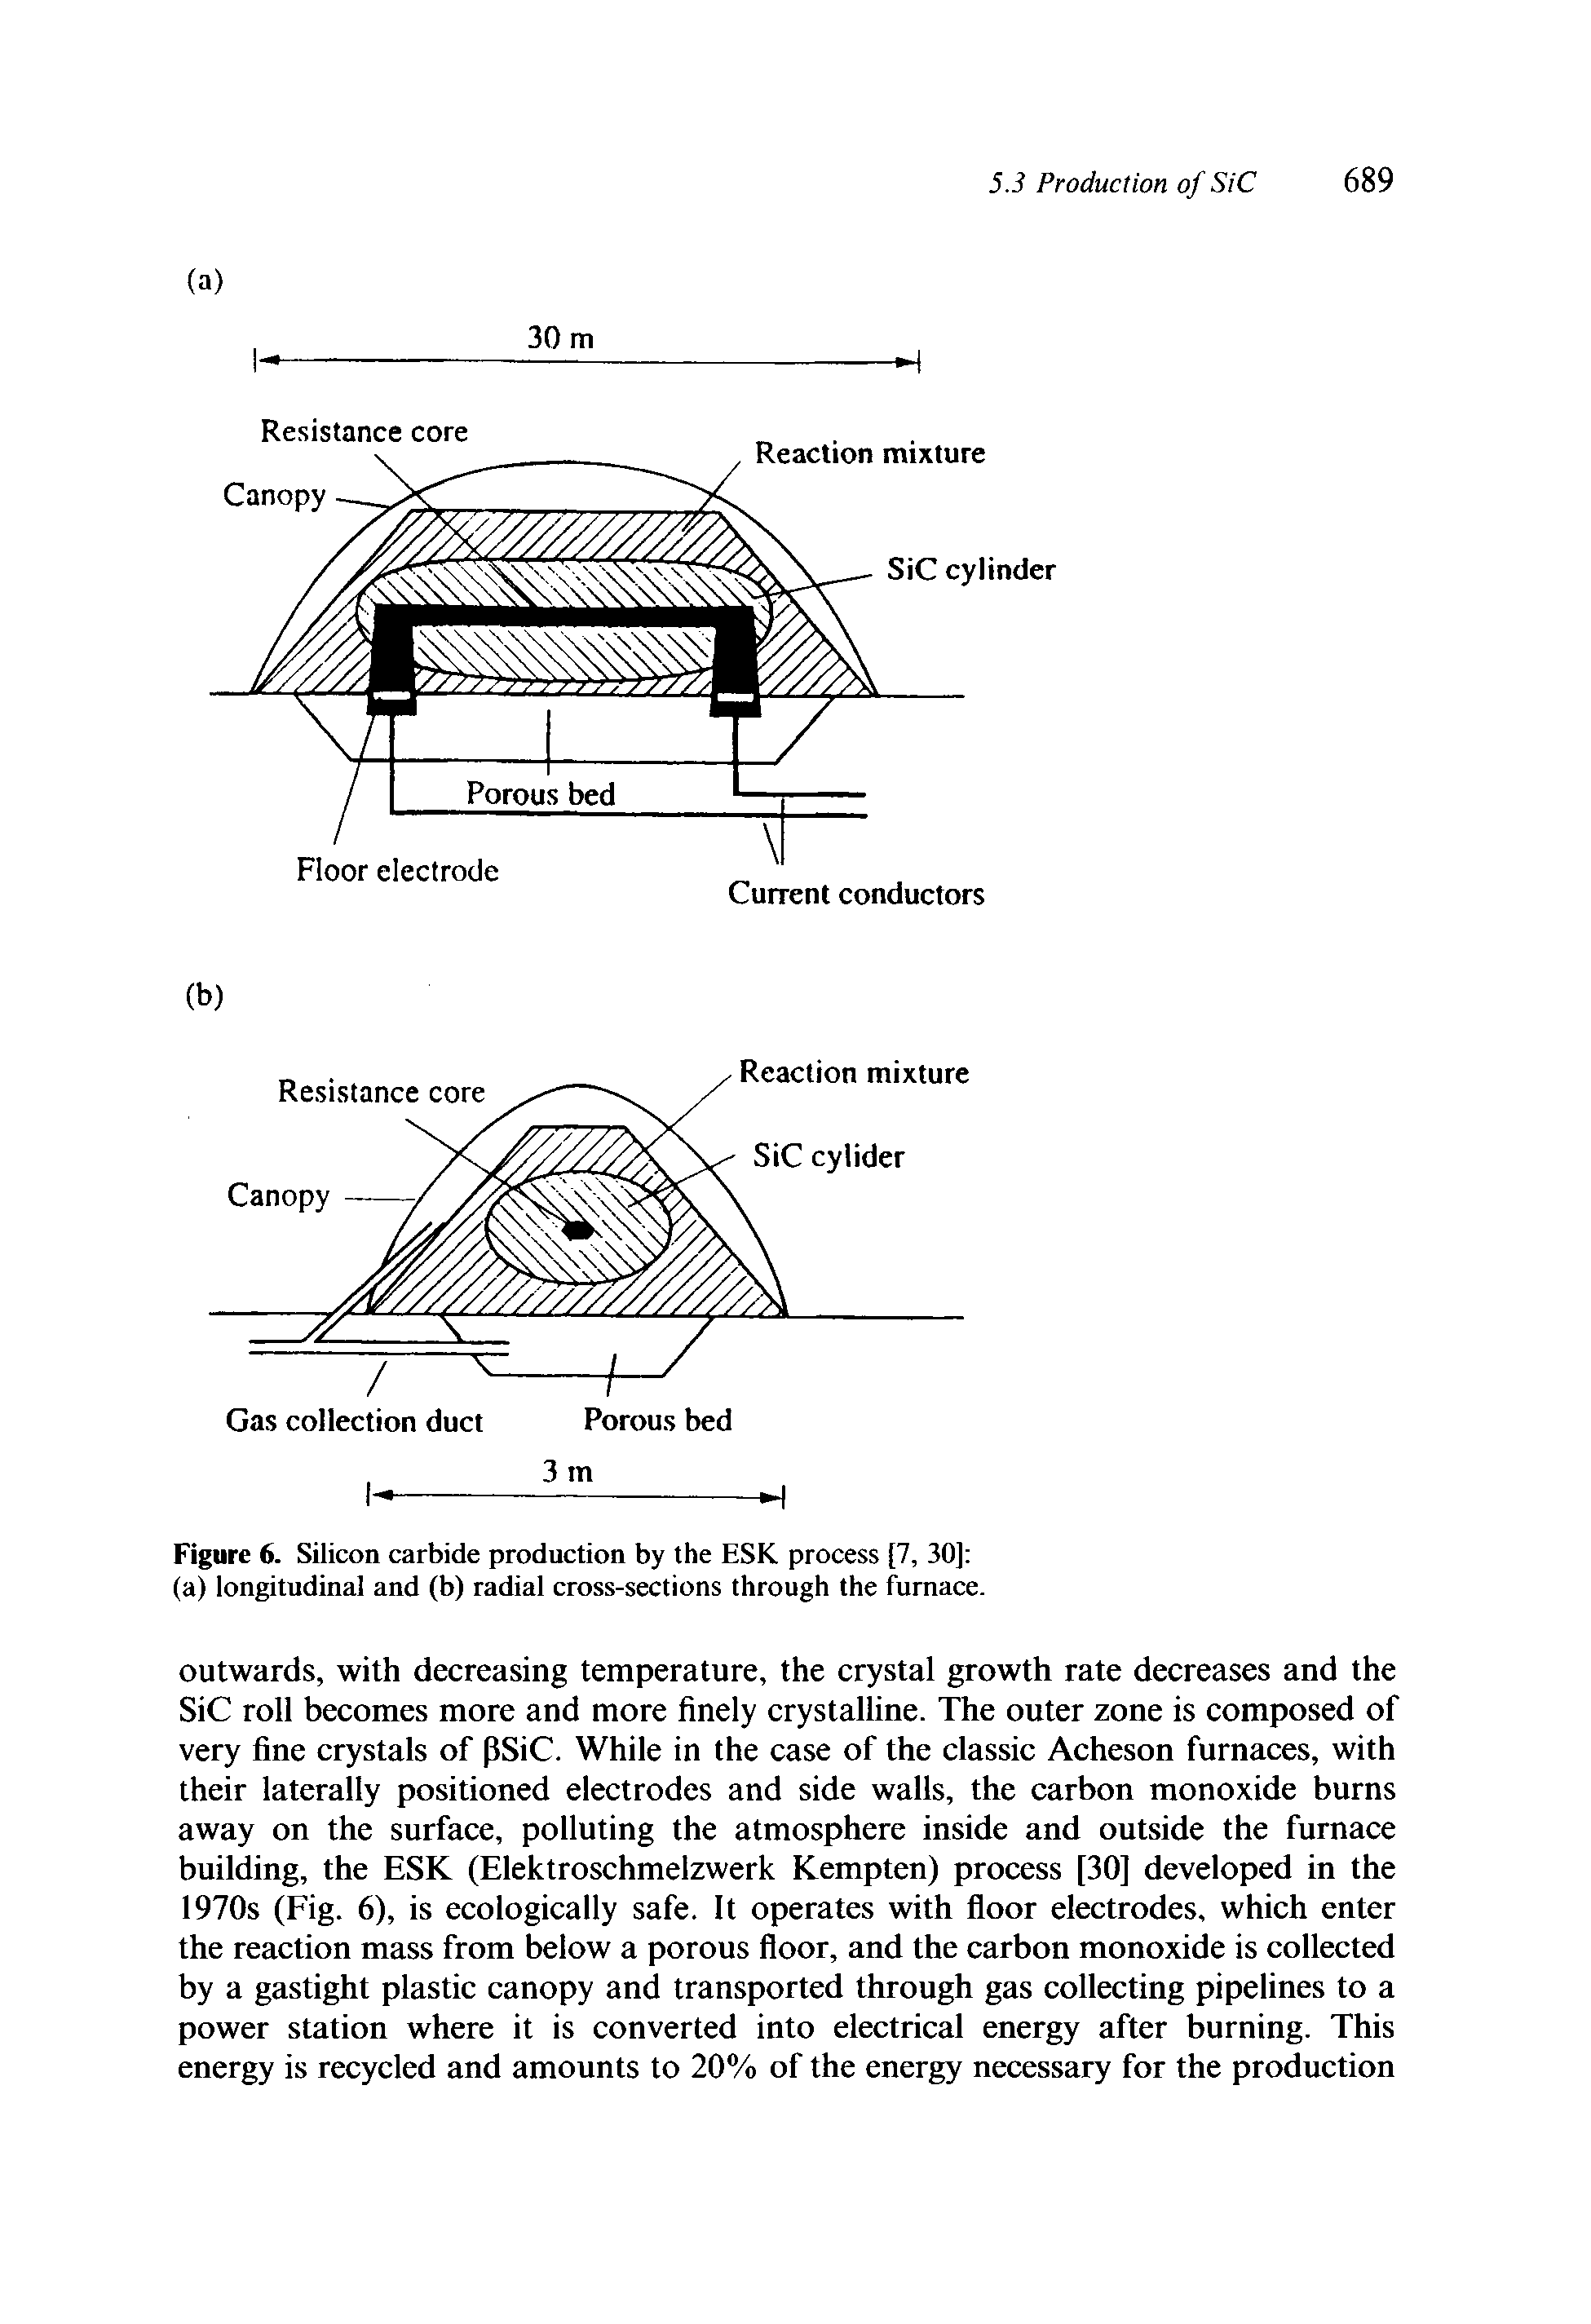 Figure 6. Silicon carbide production by the ESK process [7, 30] (a) longitudinal and (b) radial cross-sections through the furnace.